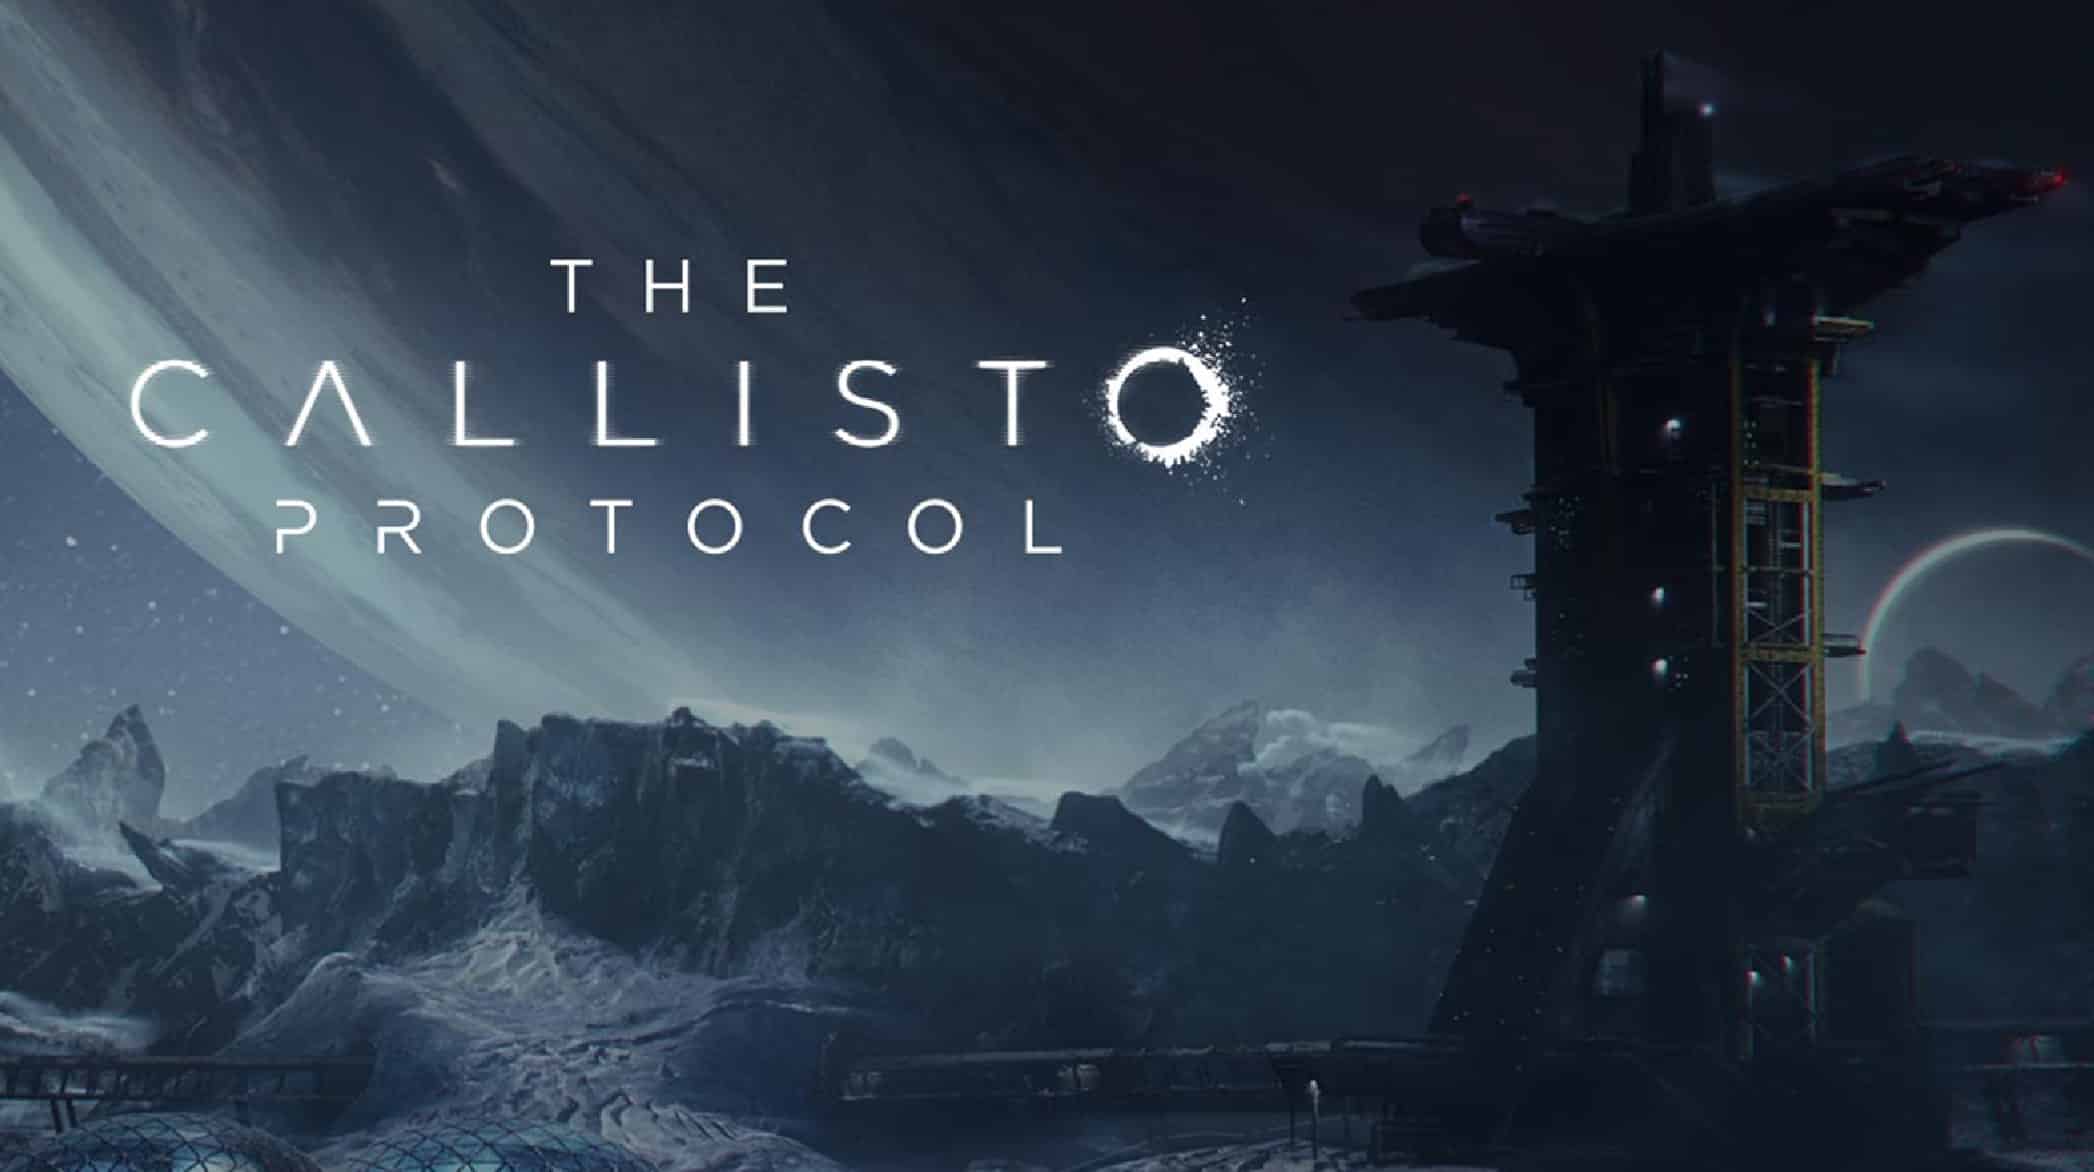 The Callisto Protocol (Day One Edition) - PlayStation 5, PlayStation 5